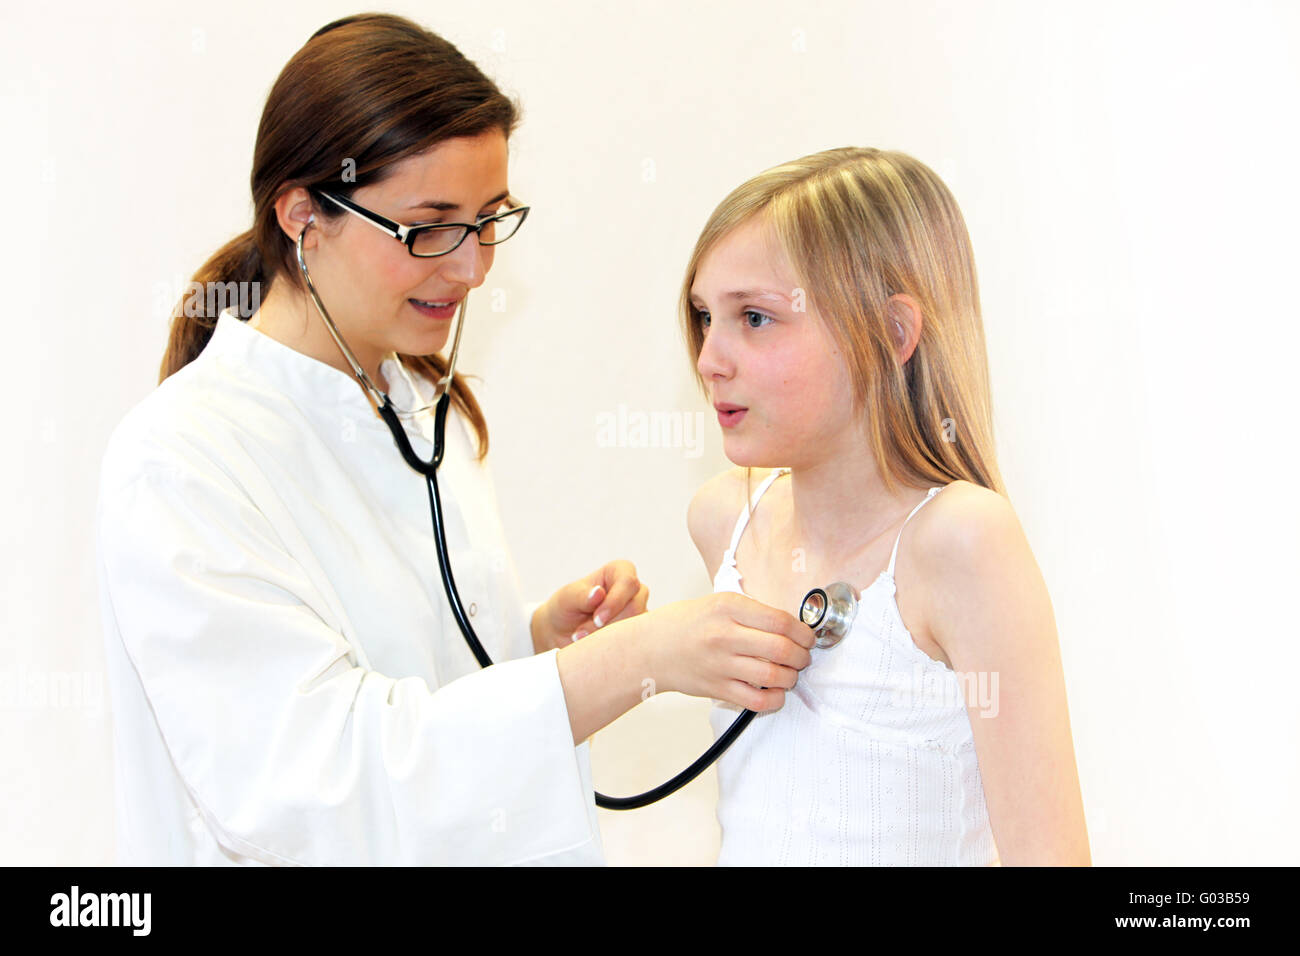 Nurse or doctor examines a child with stethoscope Stock Photo